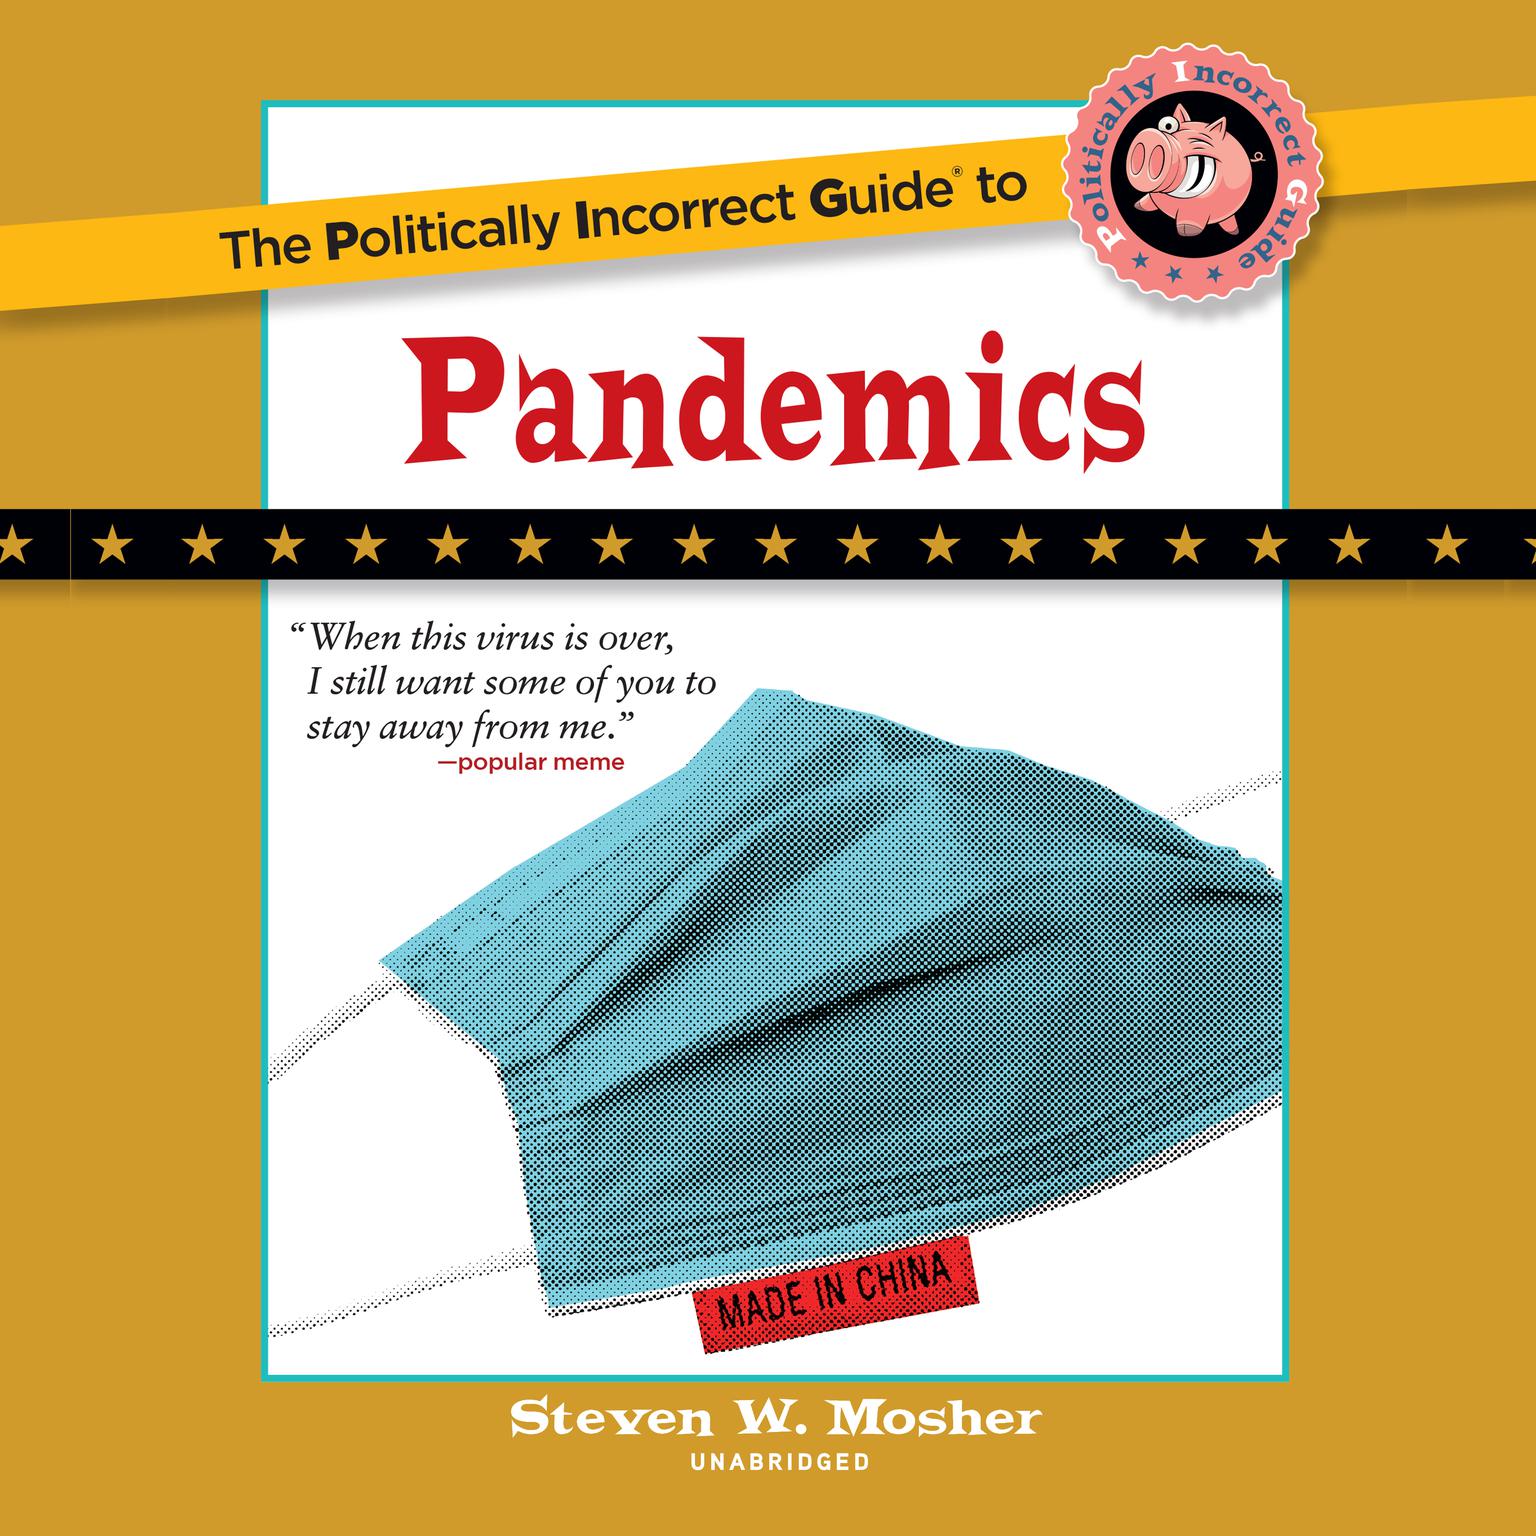 The Politically Incorrect Guide to Pandemics Audiobook, by Steven W. Mosher